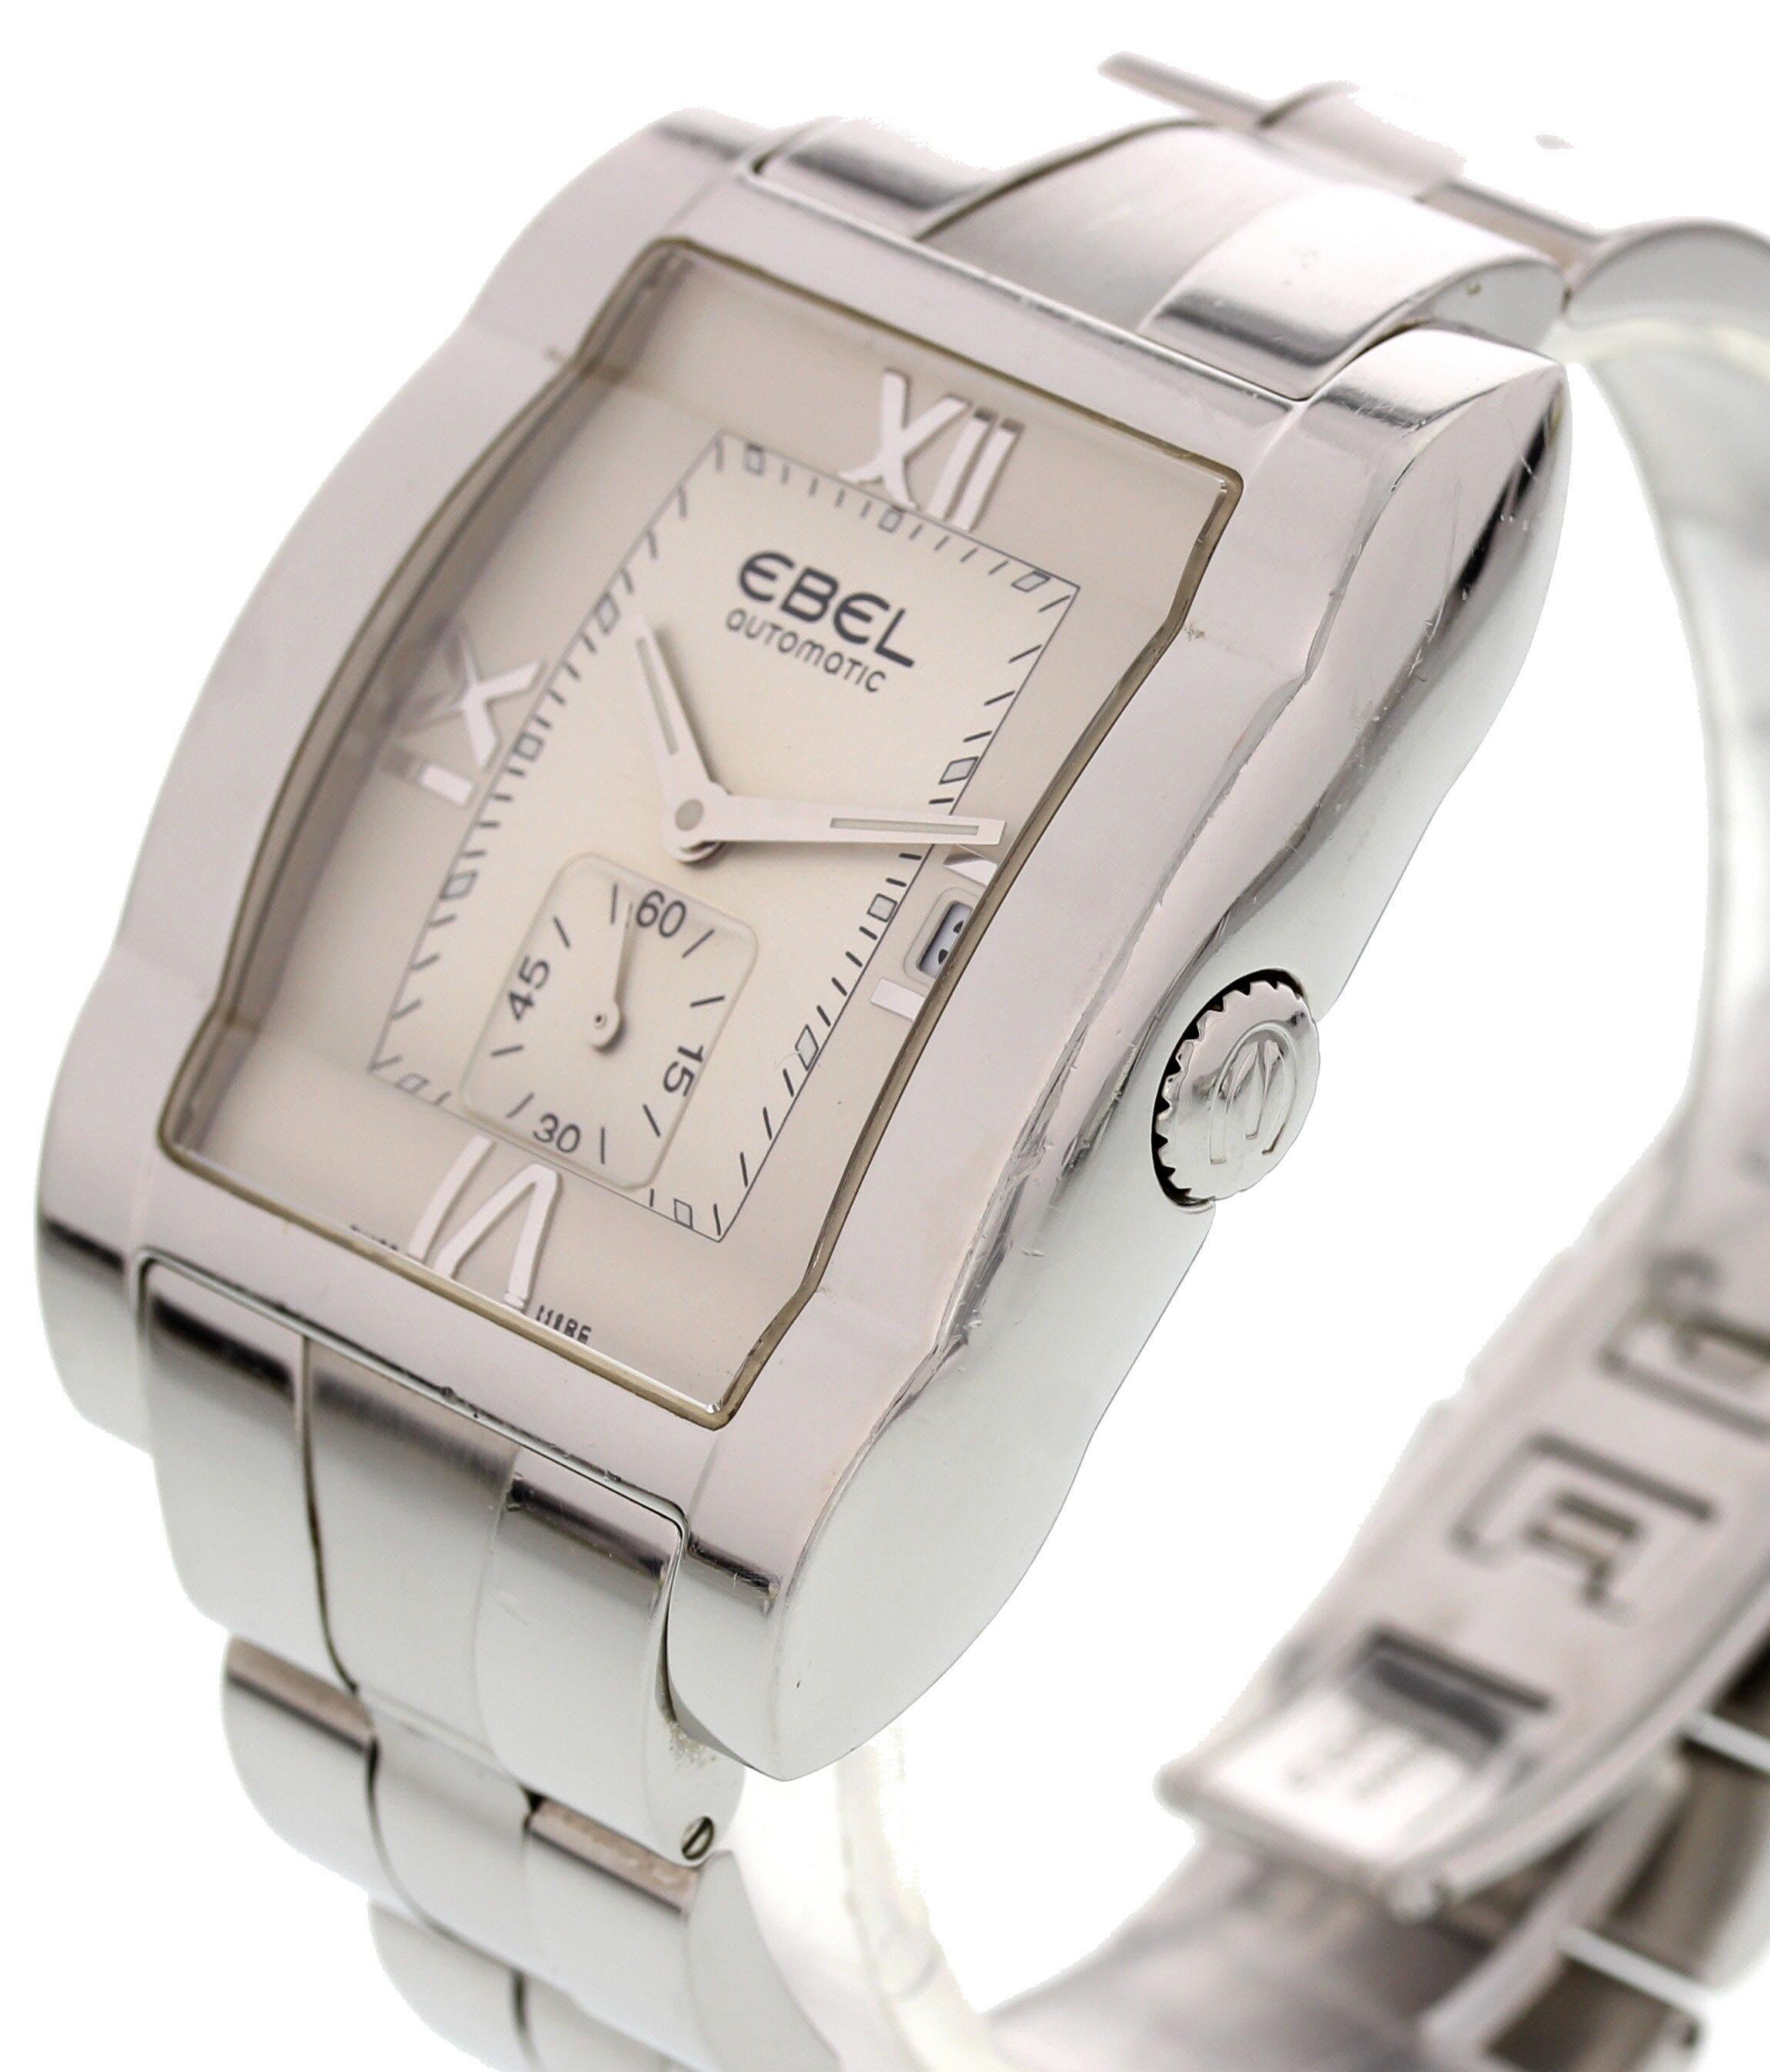 Unisex Ebel Tawara. 36mm stainless steel case. Stainless steel bezel. Silver dial with steel roman numeral 12, 9, and 6, luminous hands and markers. Seconds sub dial. Date display. Stainless steel band with hidden double folding clasp. Will fit a